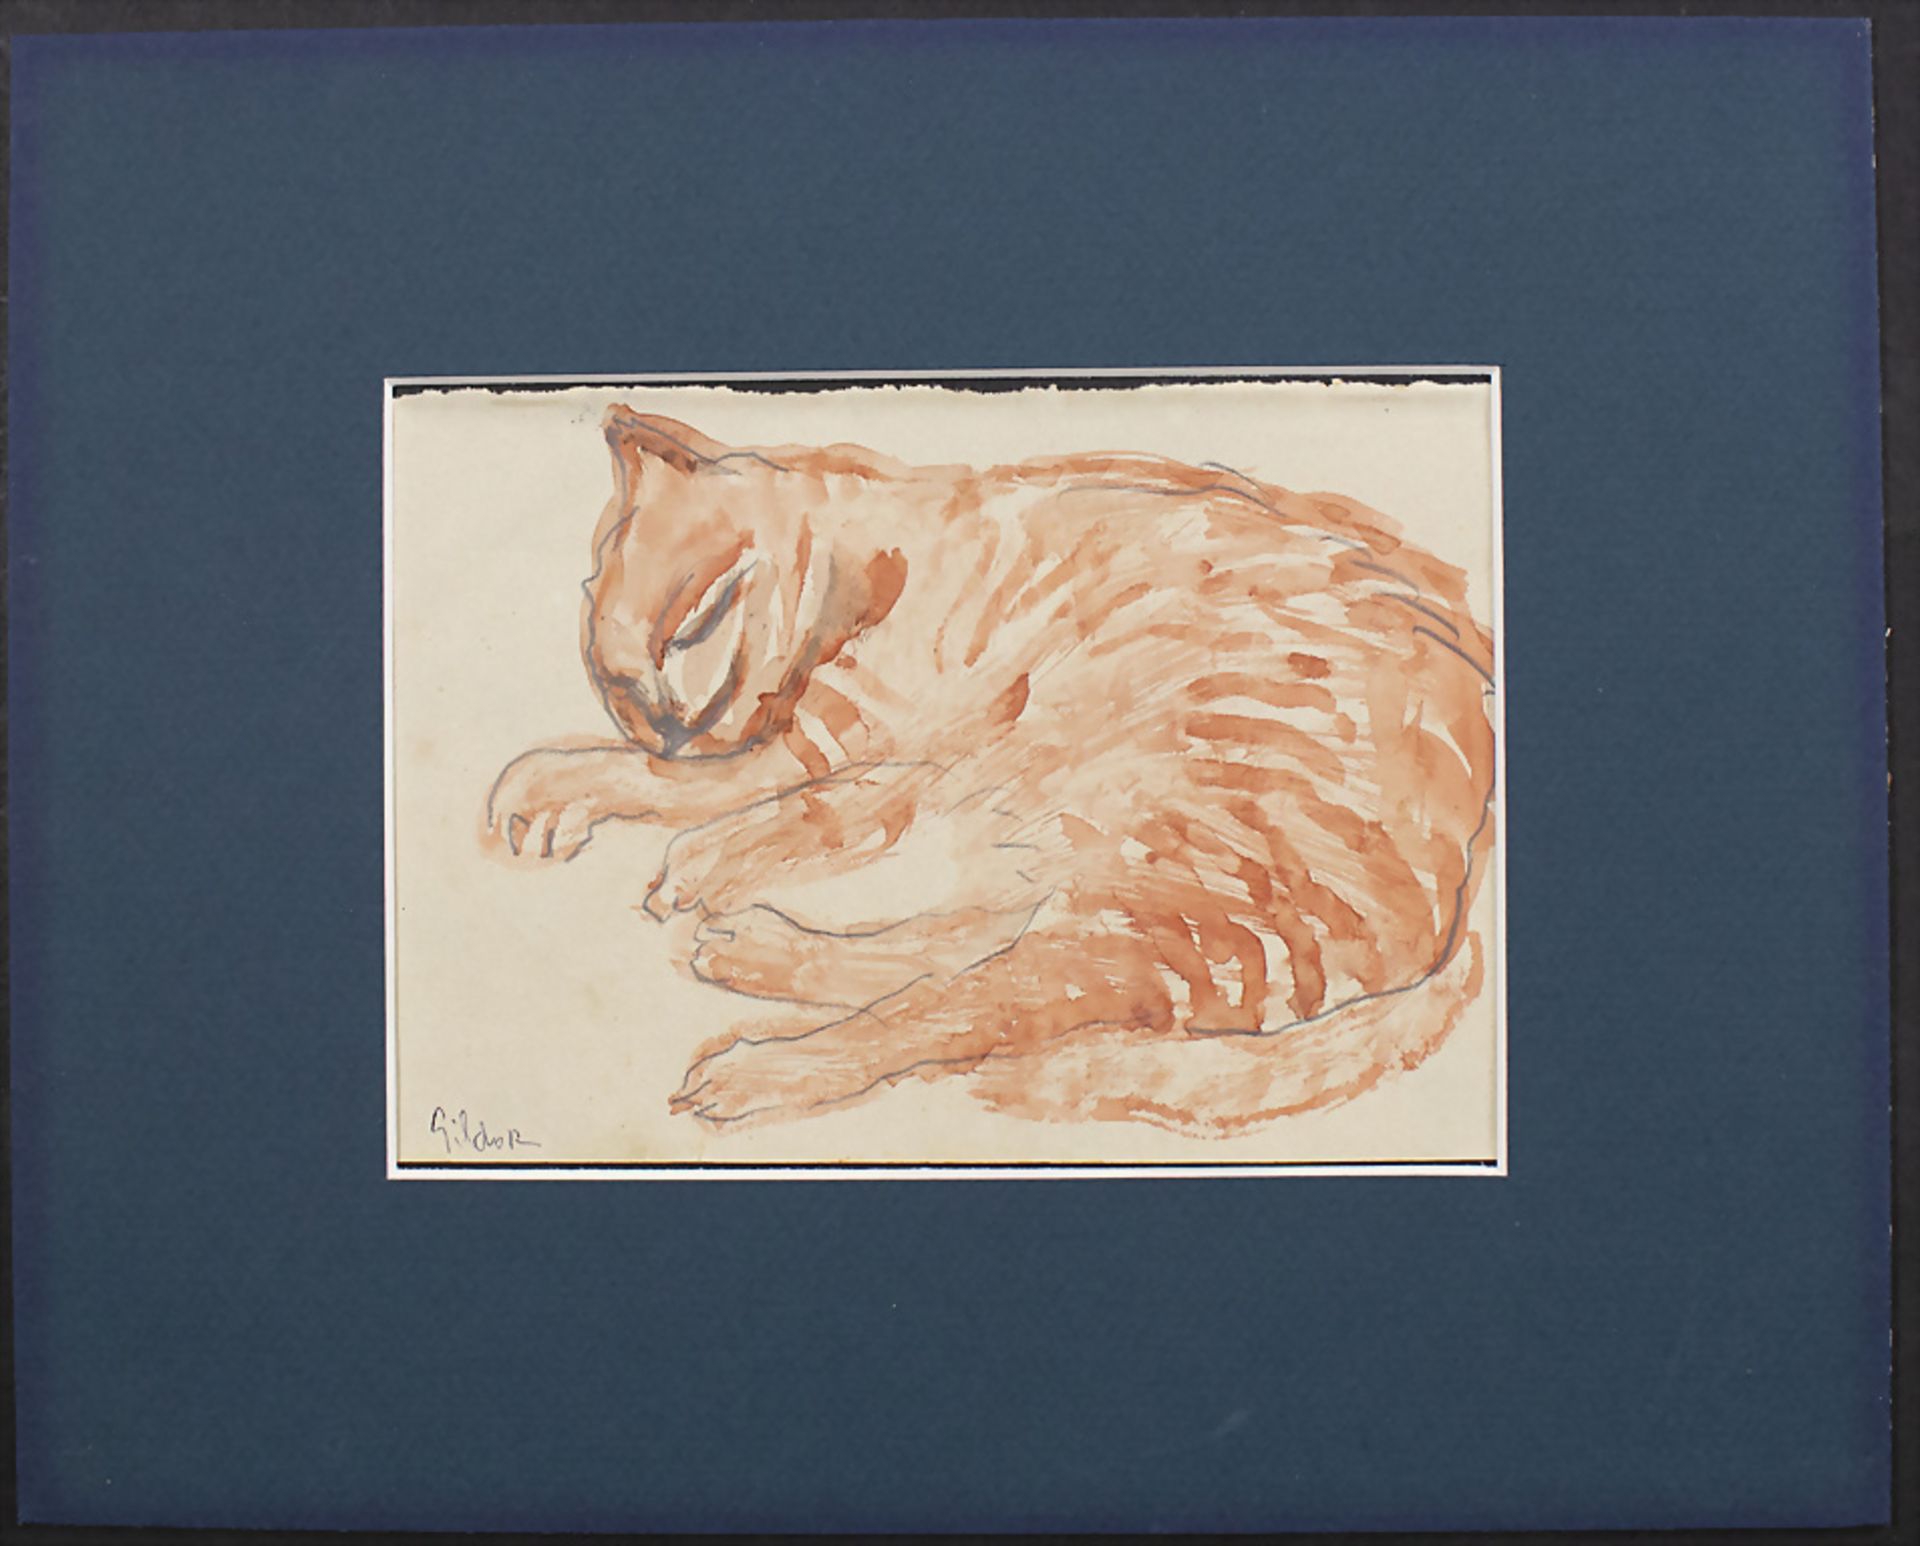 Jacob GILDOR (*1948), 'Schlafende rote Katze' / 'Sleeping red cat' - Image 2 of 4